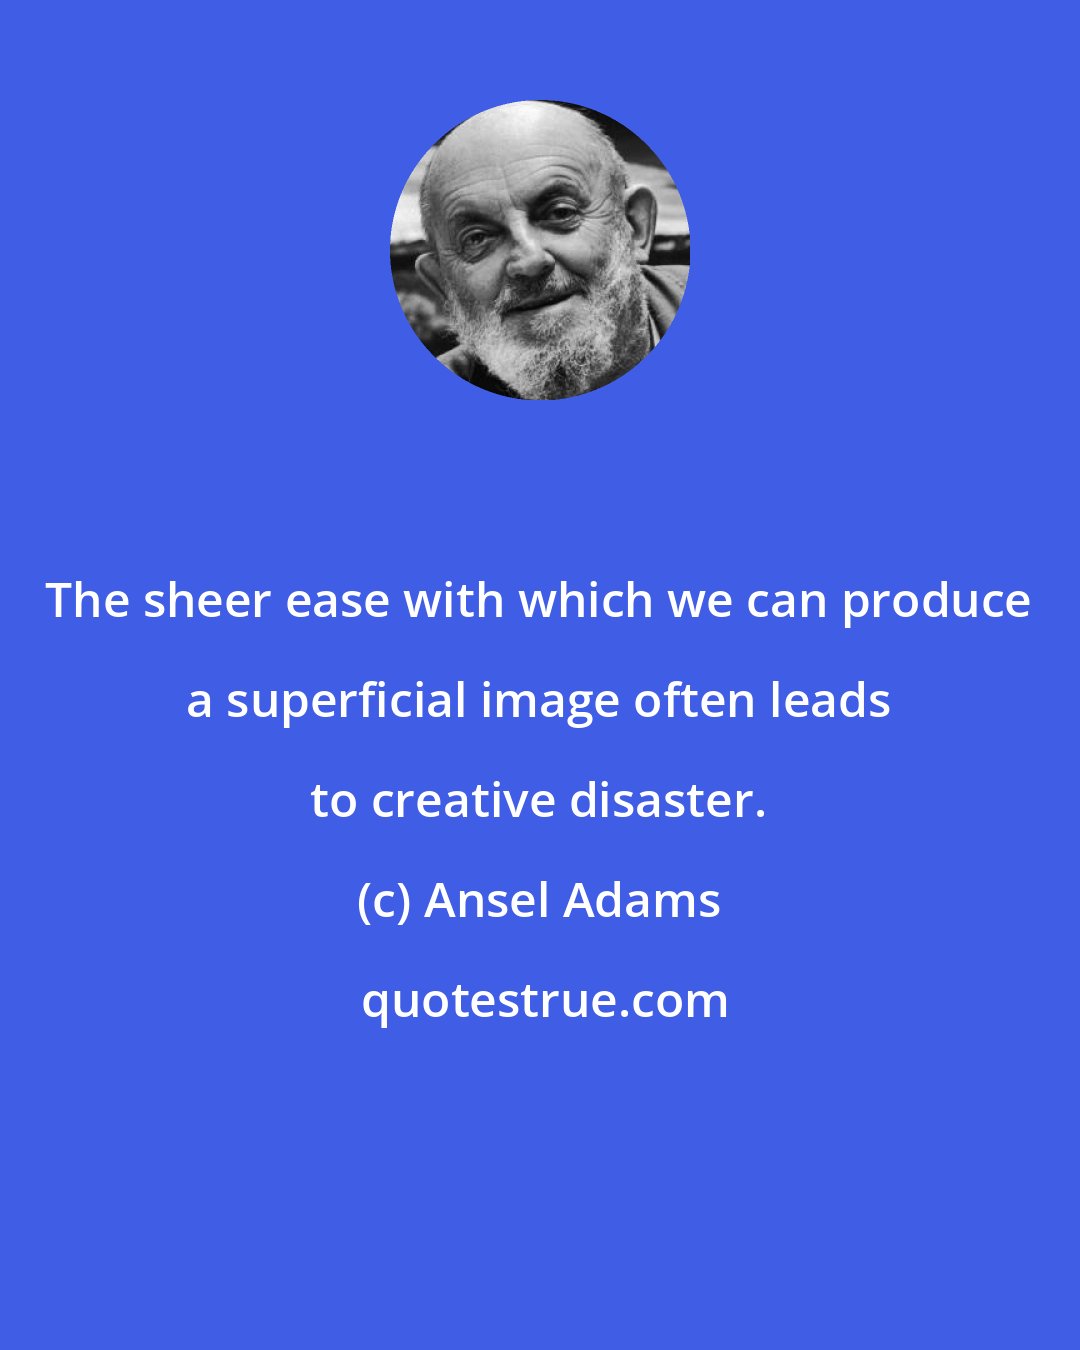 Ansel Adams: The sheer ease with which we can produce a superficial image often leads to creative disaster.